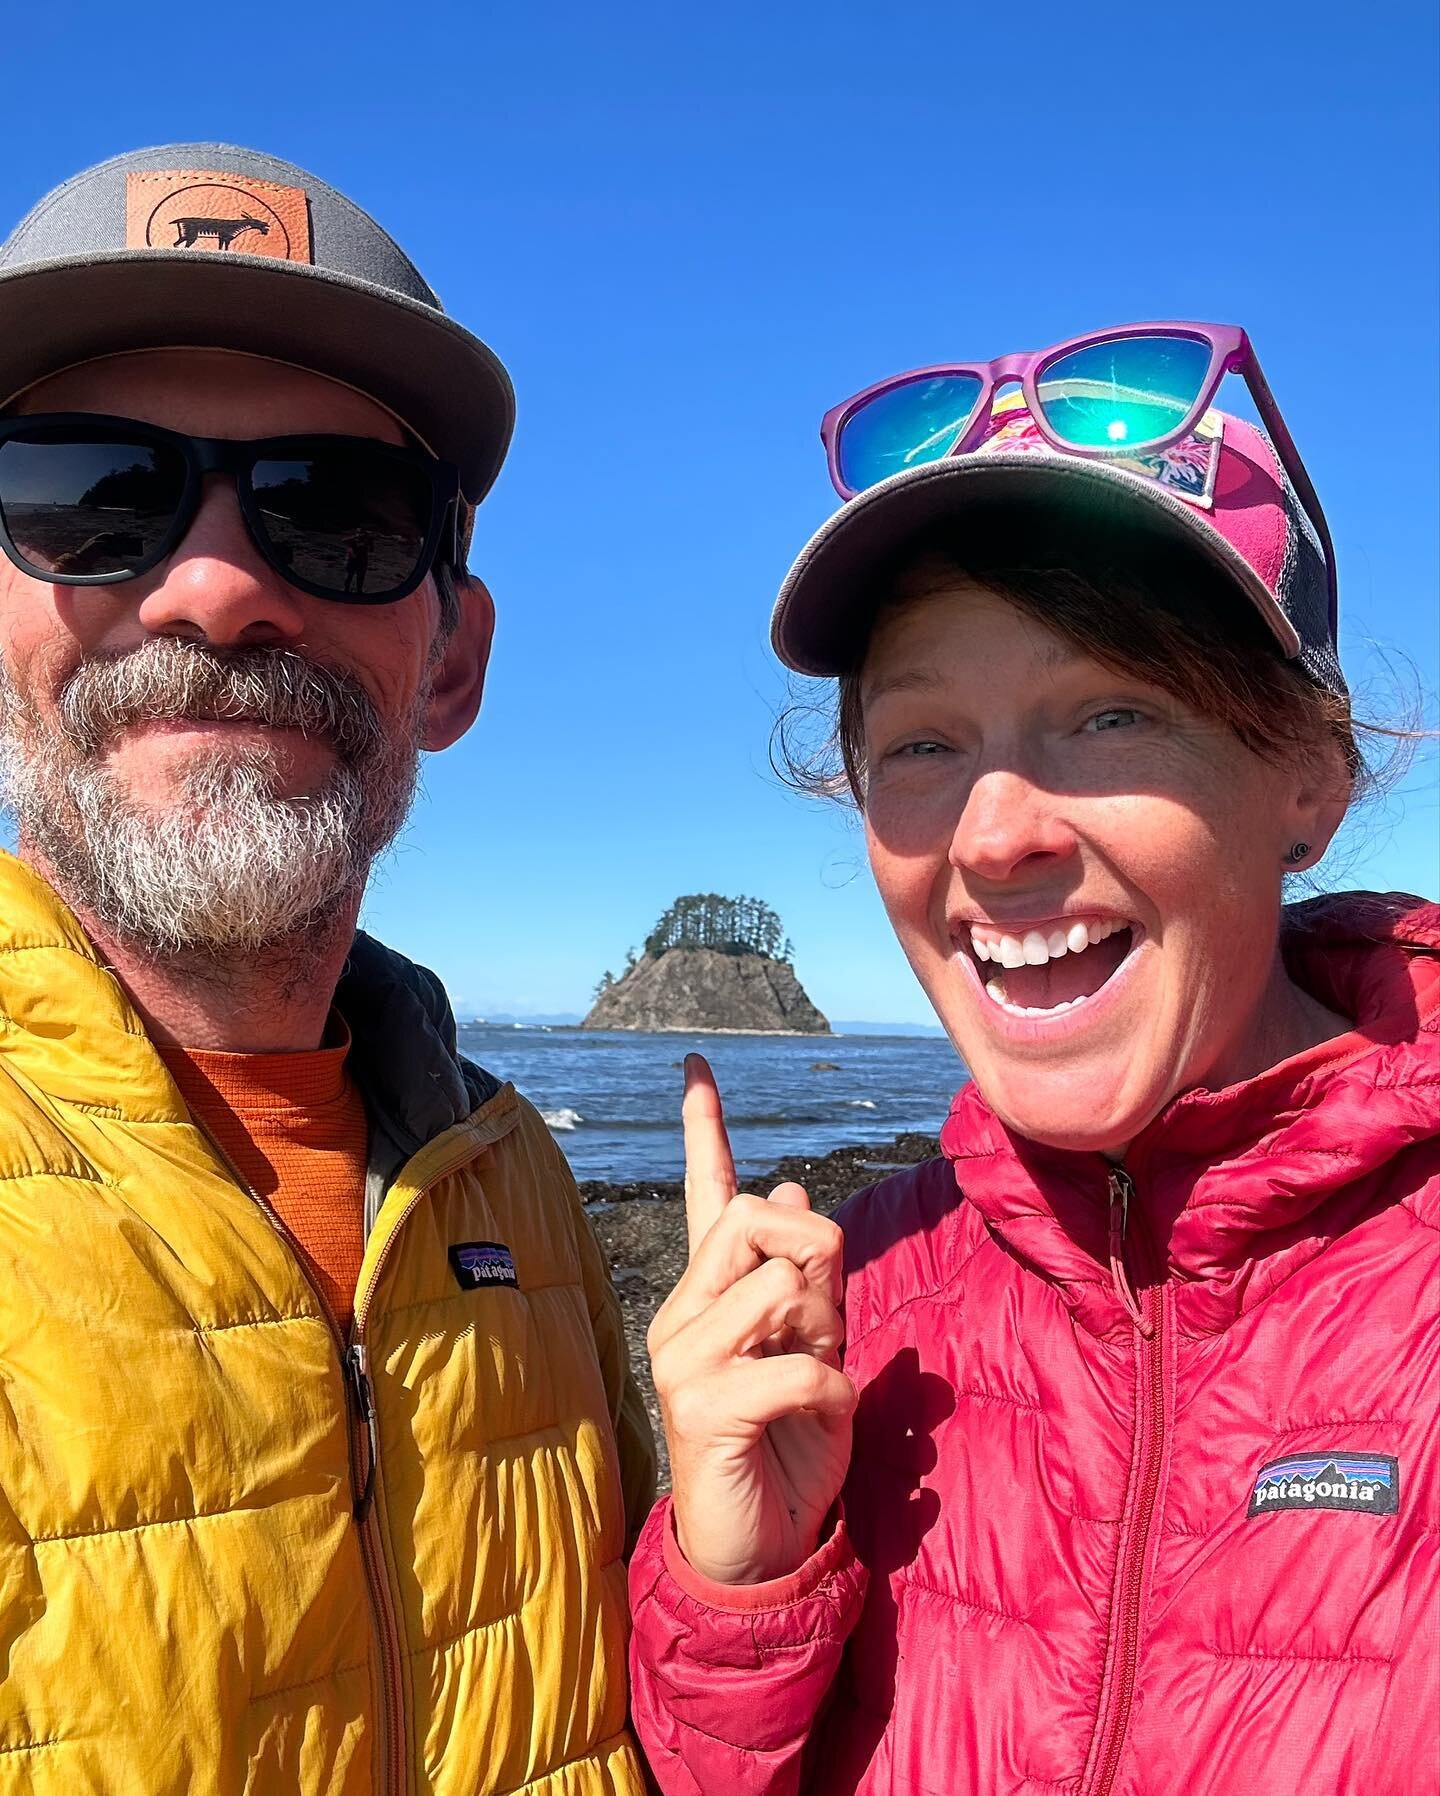 The finish at Cape Alava! The end of the PNT. It was a beautiful day &amp; we were so grateful. Our friend Justin hiked in to find us and camped with us on our last night. He came with bagels and cream cheese for us. 😋 Olivia who is working on our d